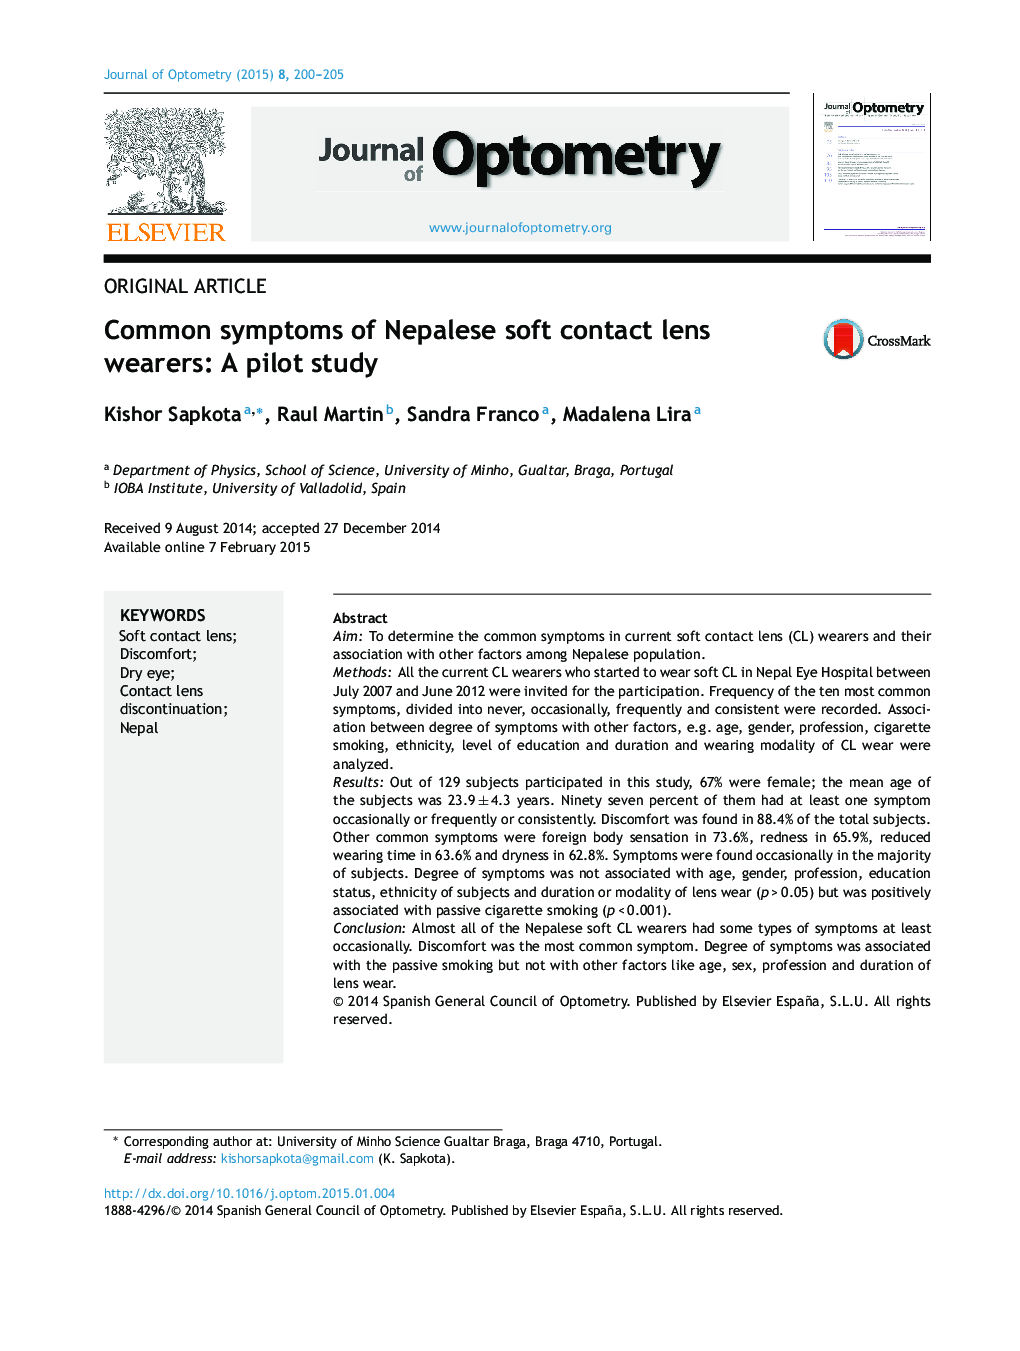 Common symptoms of Nepalese soft contact lens wearers: A pilot study